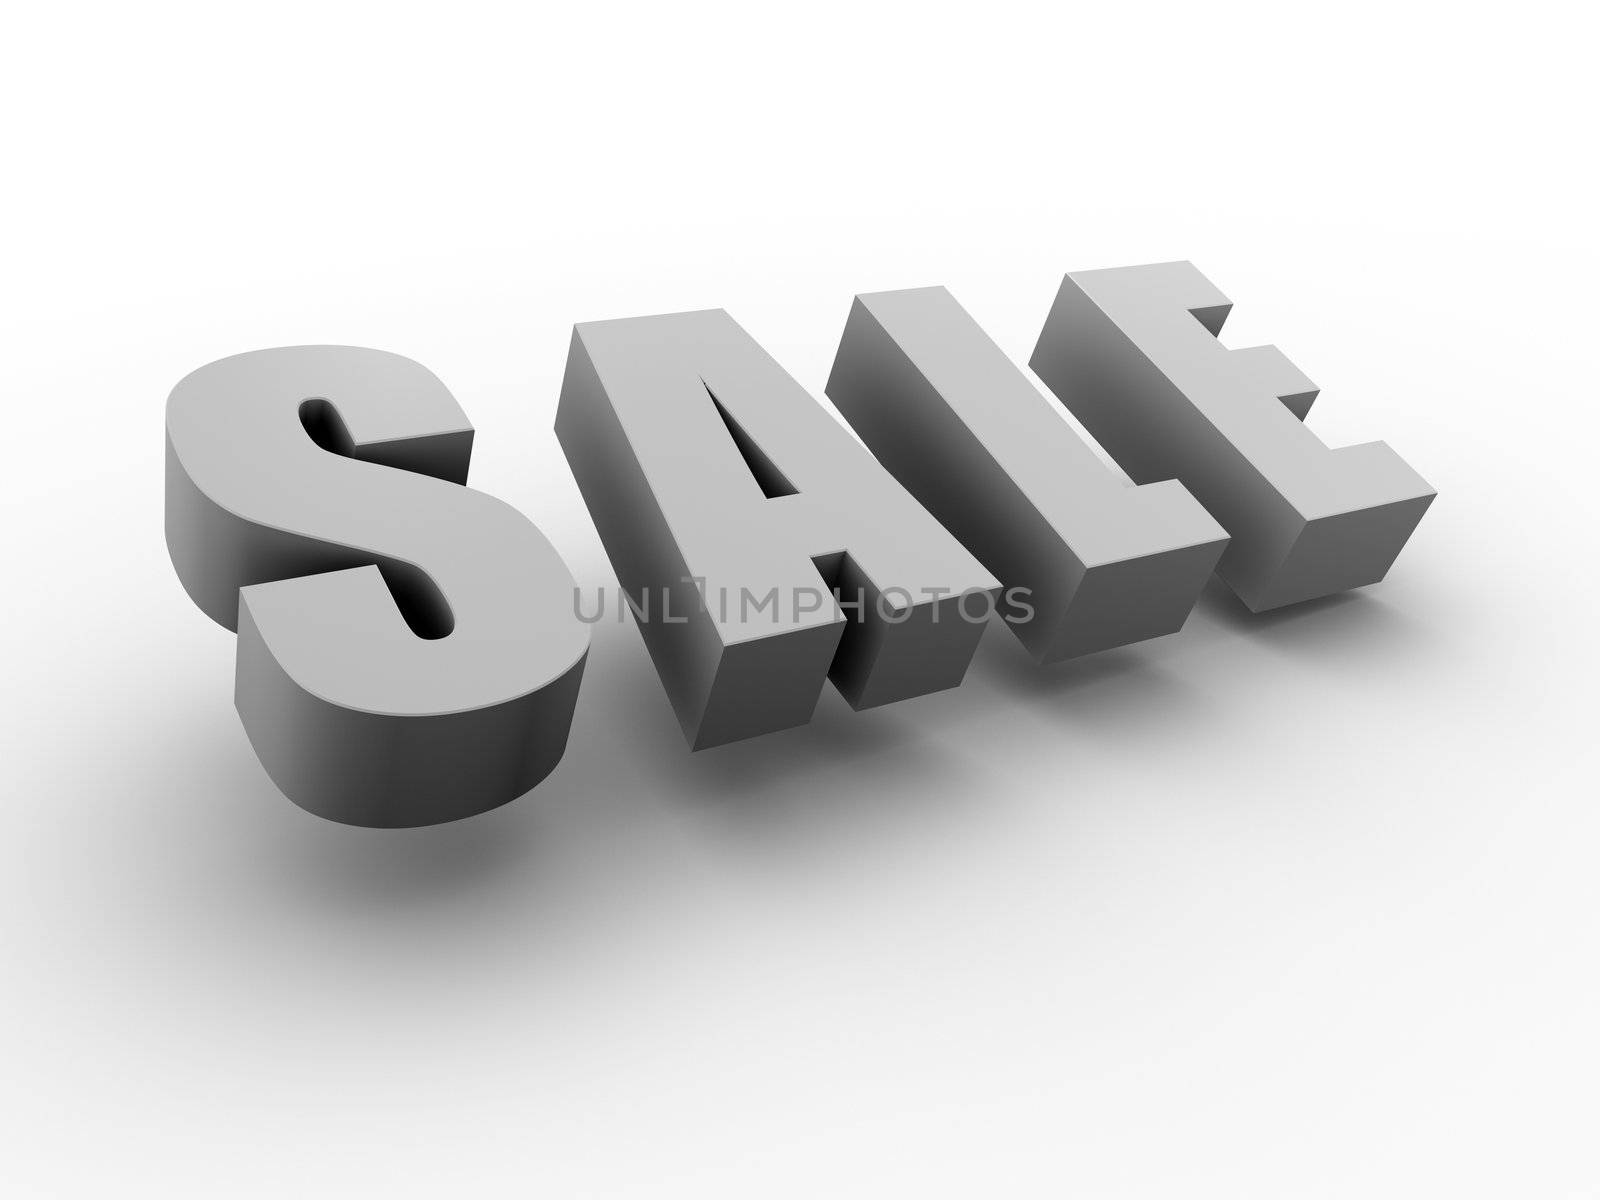 An image of a nice sale sign